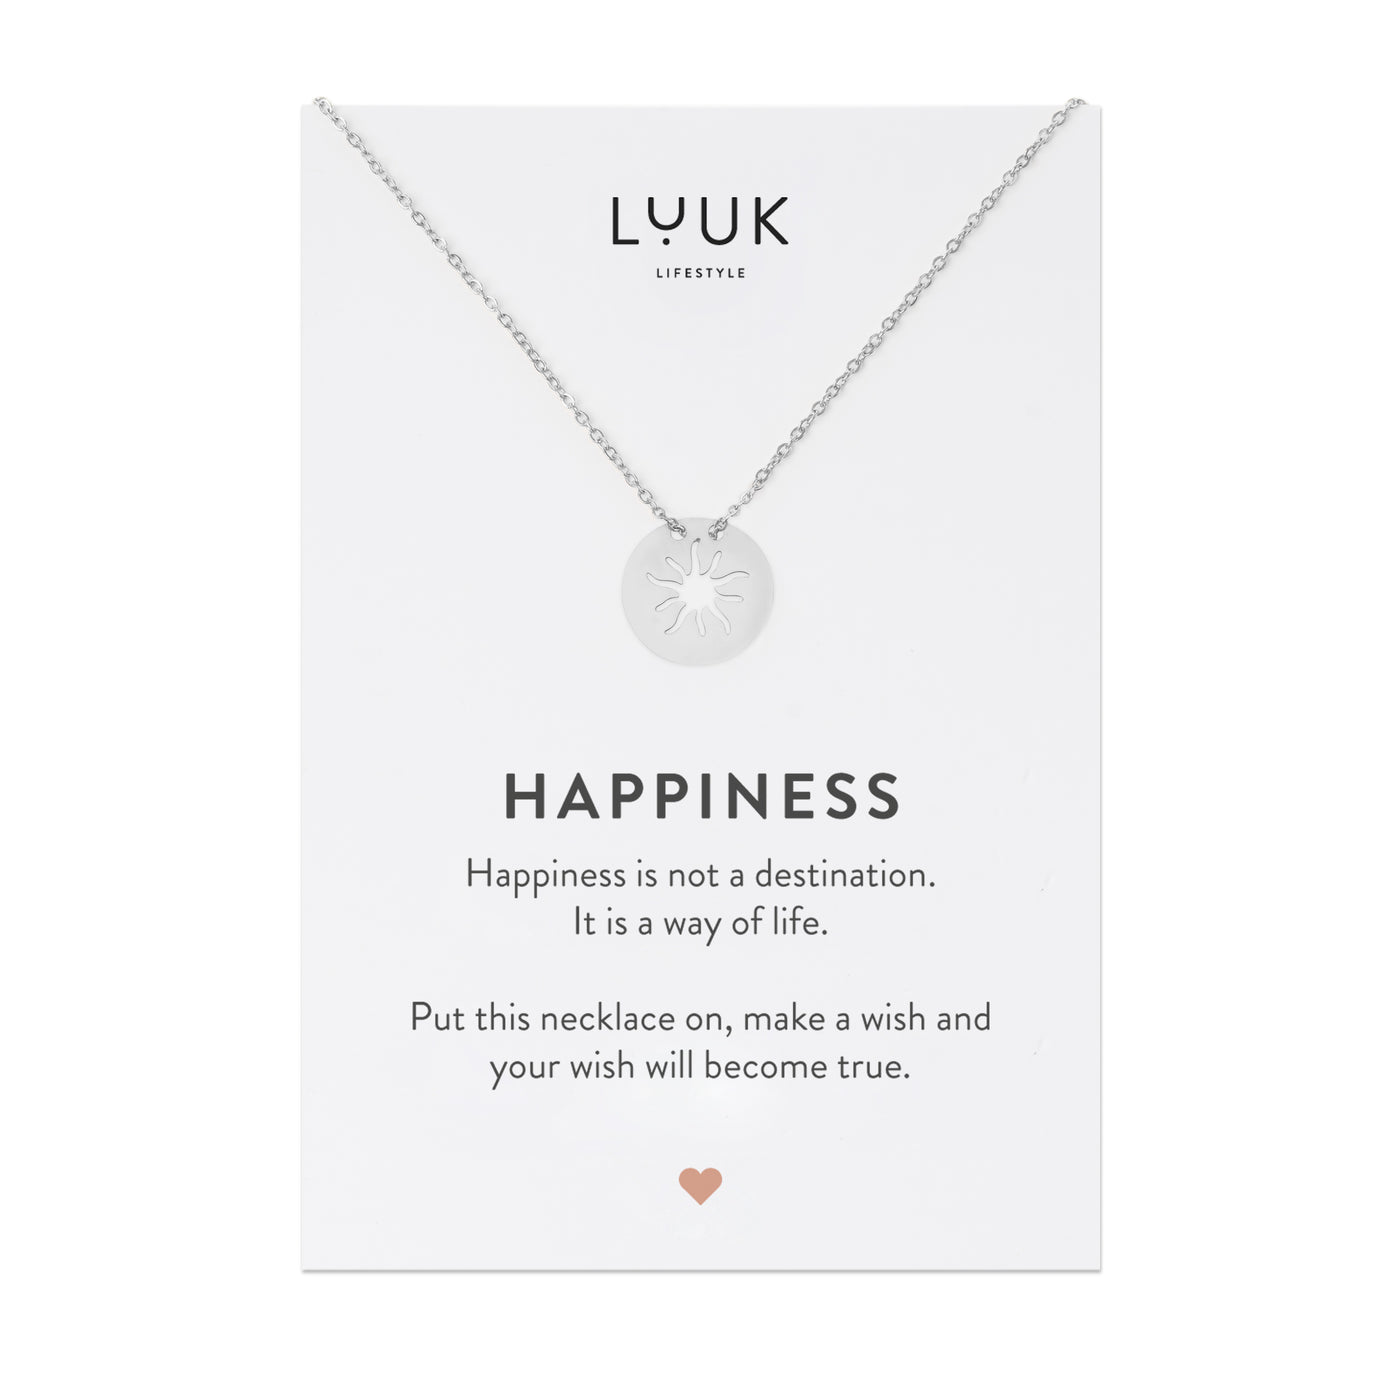 Necklace with sun pendant and Happiness greeting card